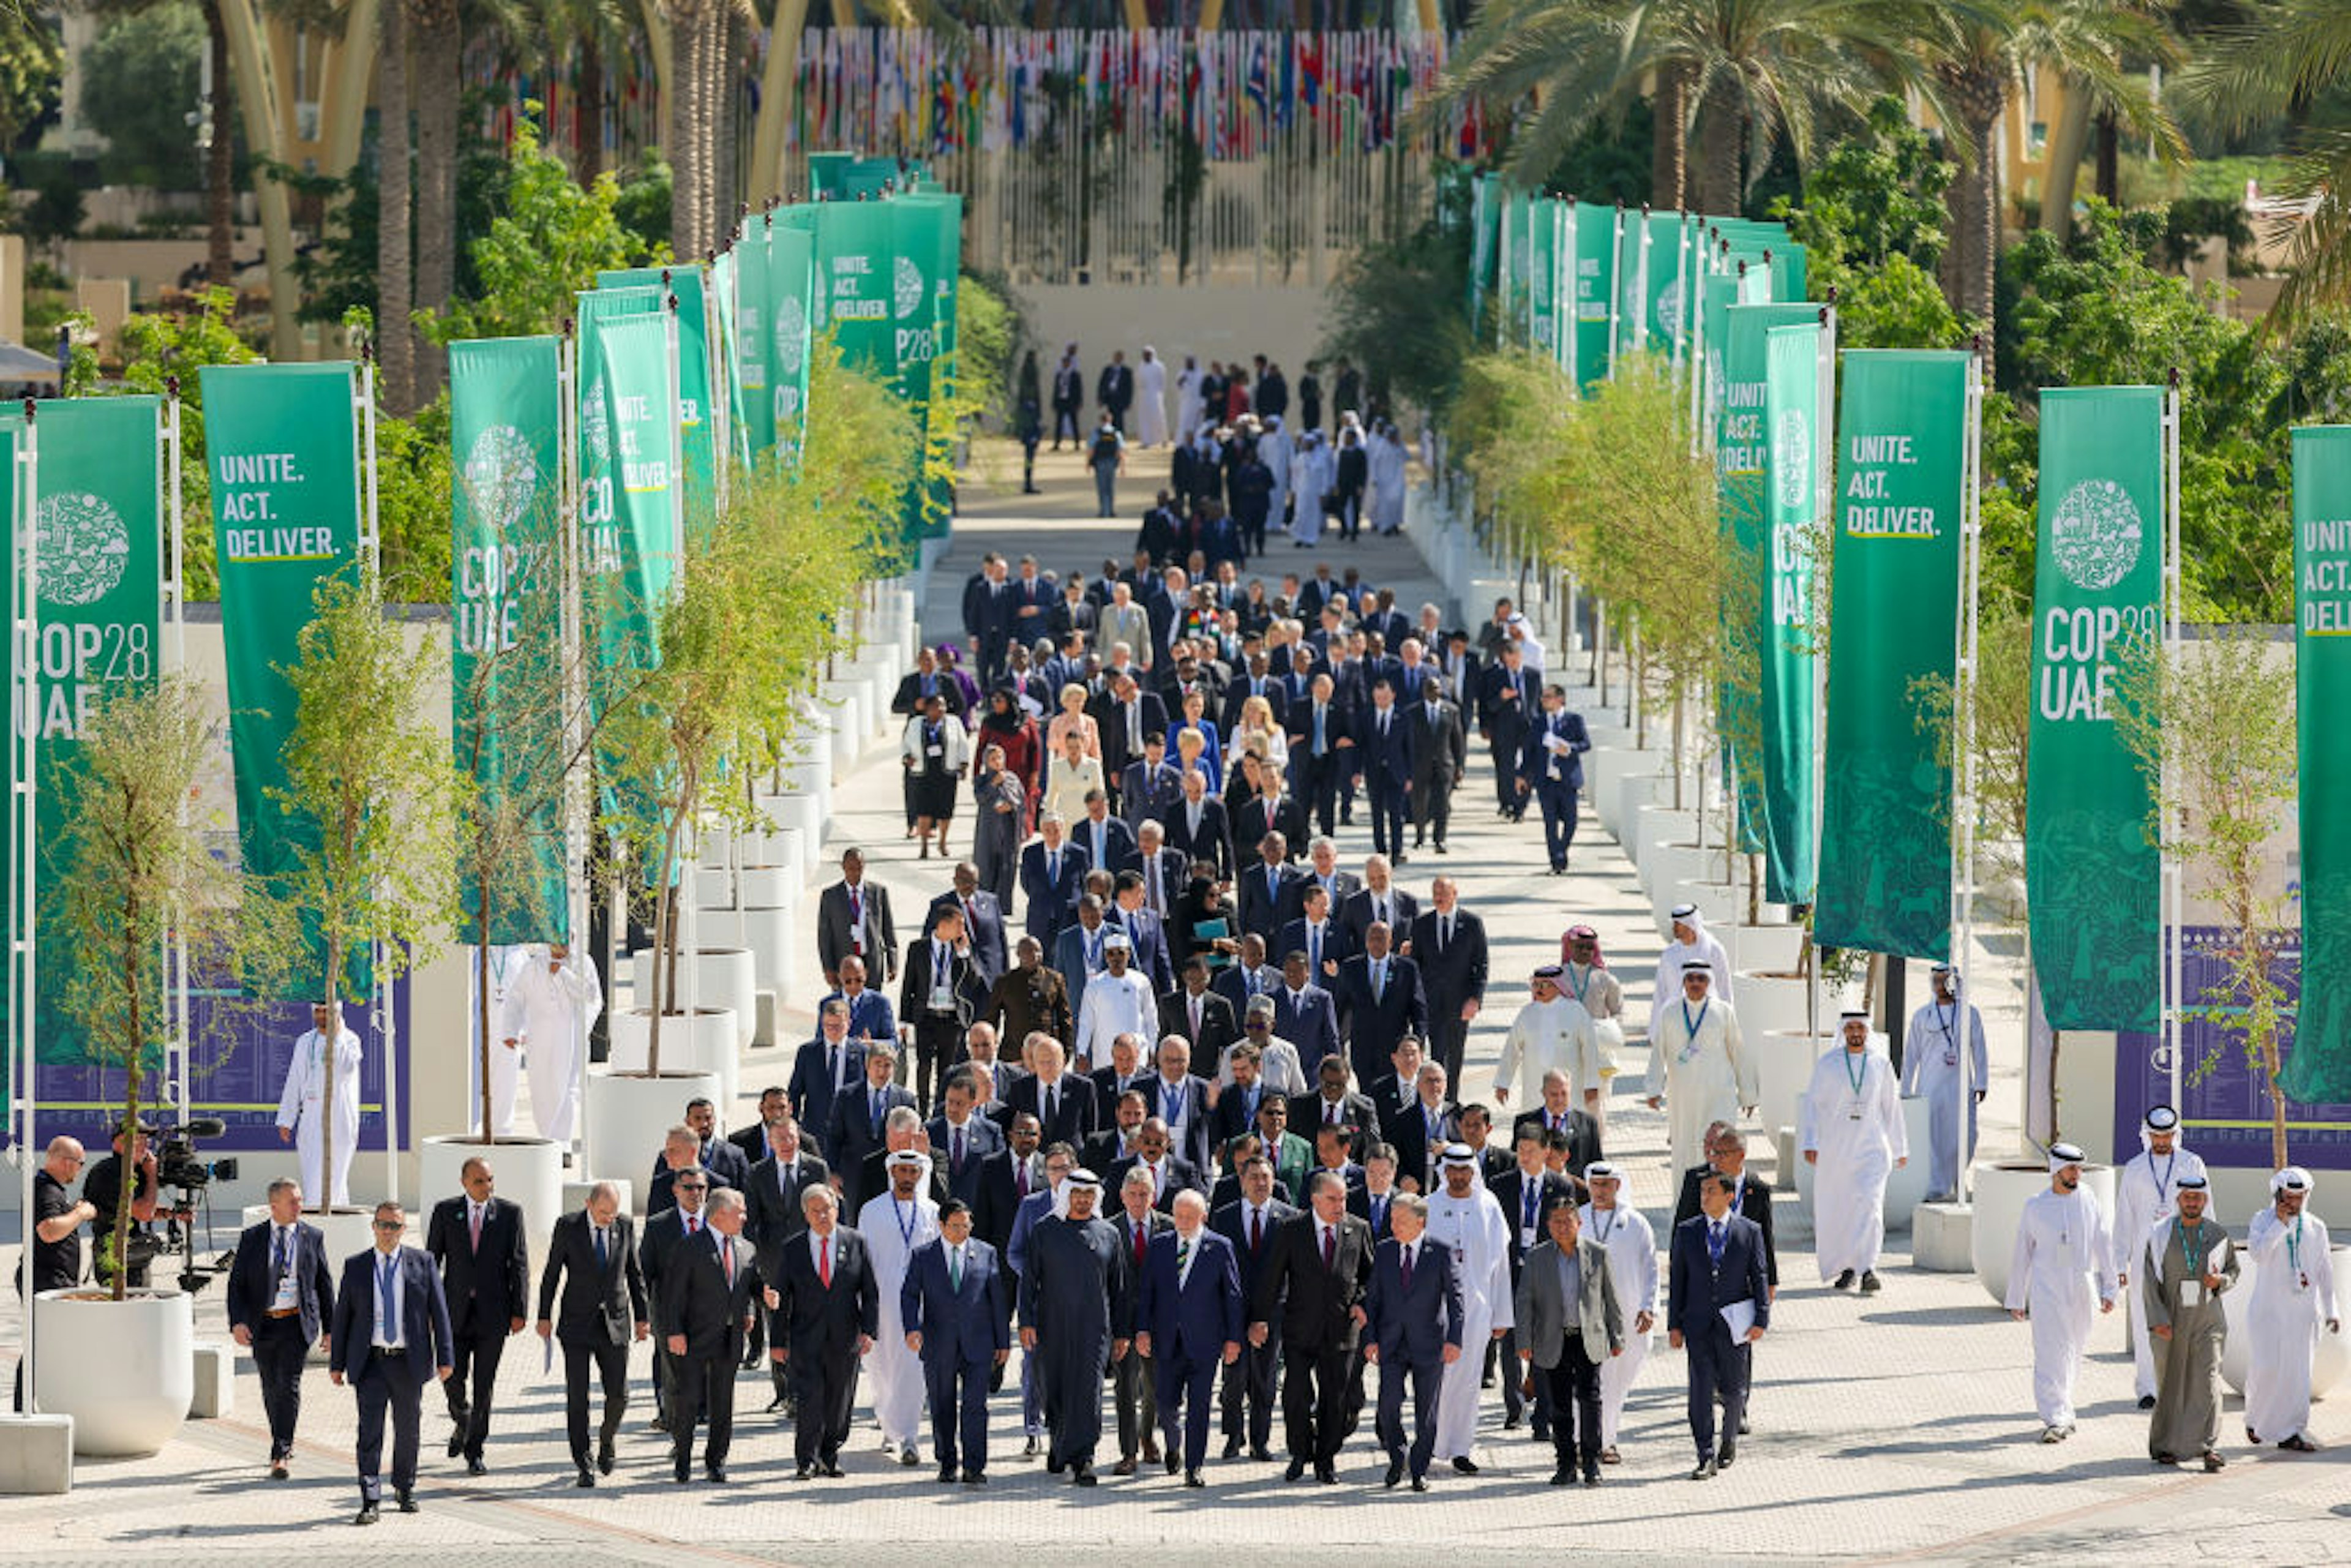 DUBAI, UNITED ARAB EMIRATES - DECEMBER 1: In this handout image provided by COP28, world leaders walk down Al Wasl avenue following a family photo during day one of the high-level segment of the UNFCCC COP28 Climate Conference at Expo City Dubai on December 1, 2023 in Dubai, United Arab Emirates. The COP28, which is running from November 30 through December 12, brings together stakeholders, including international heads of state and other leaders, scientists, environmentalists, indigenous peoples representatives, activists and others to discuss and agree on the implementation of global measures towards mitigating the effects of climate change. (Photo by Neville Hopwood/COP28 via Getty Images)